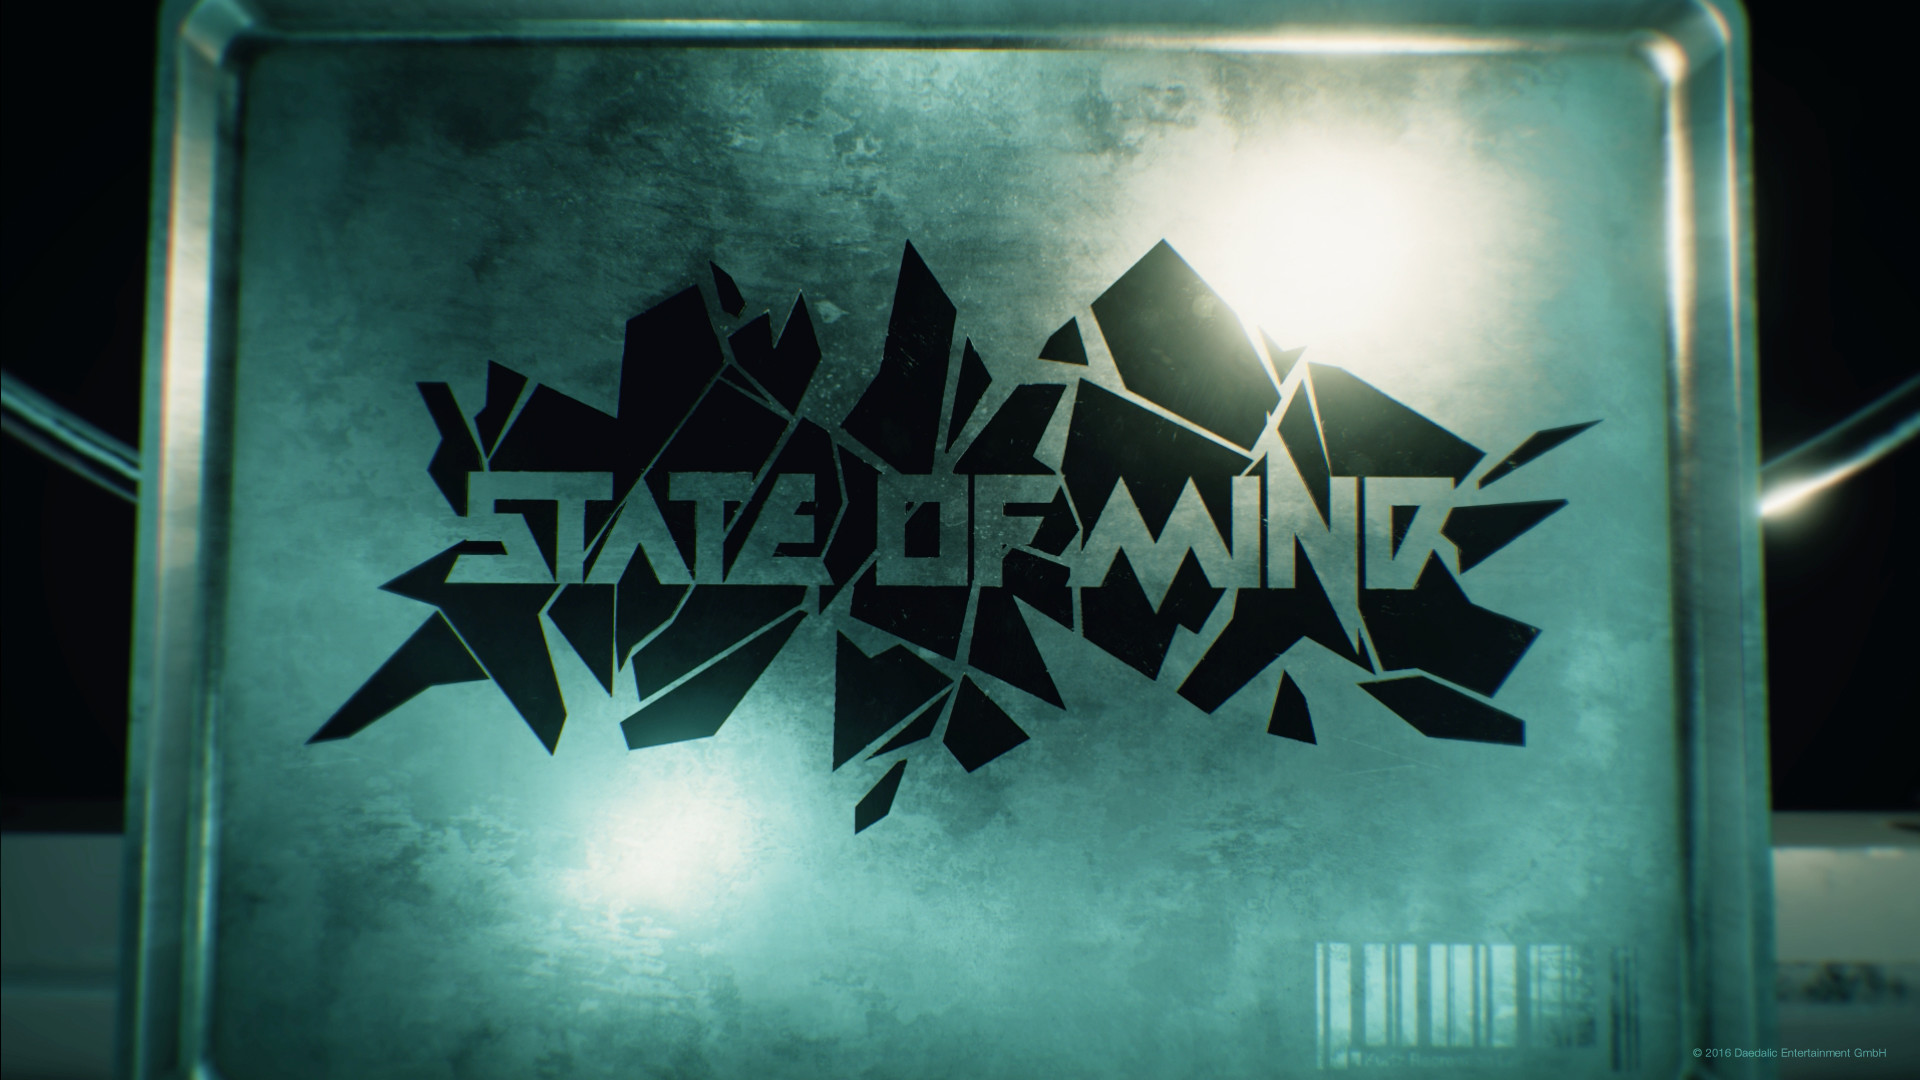 State of Mind - Announcement Teaser 